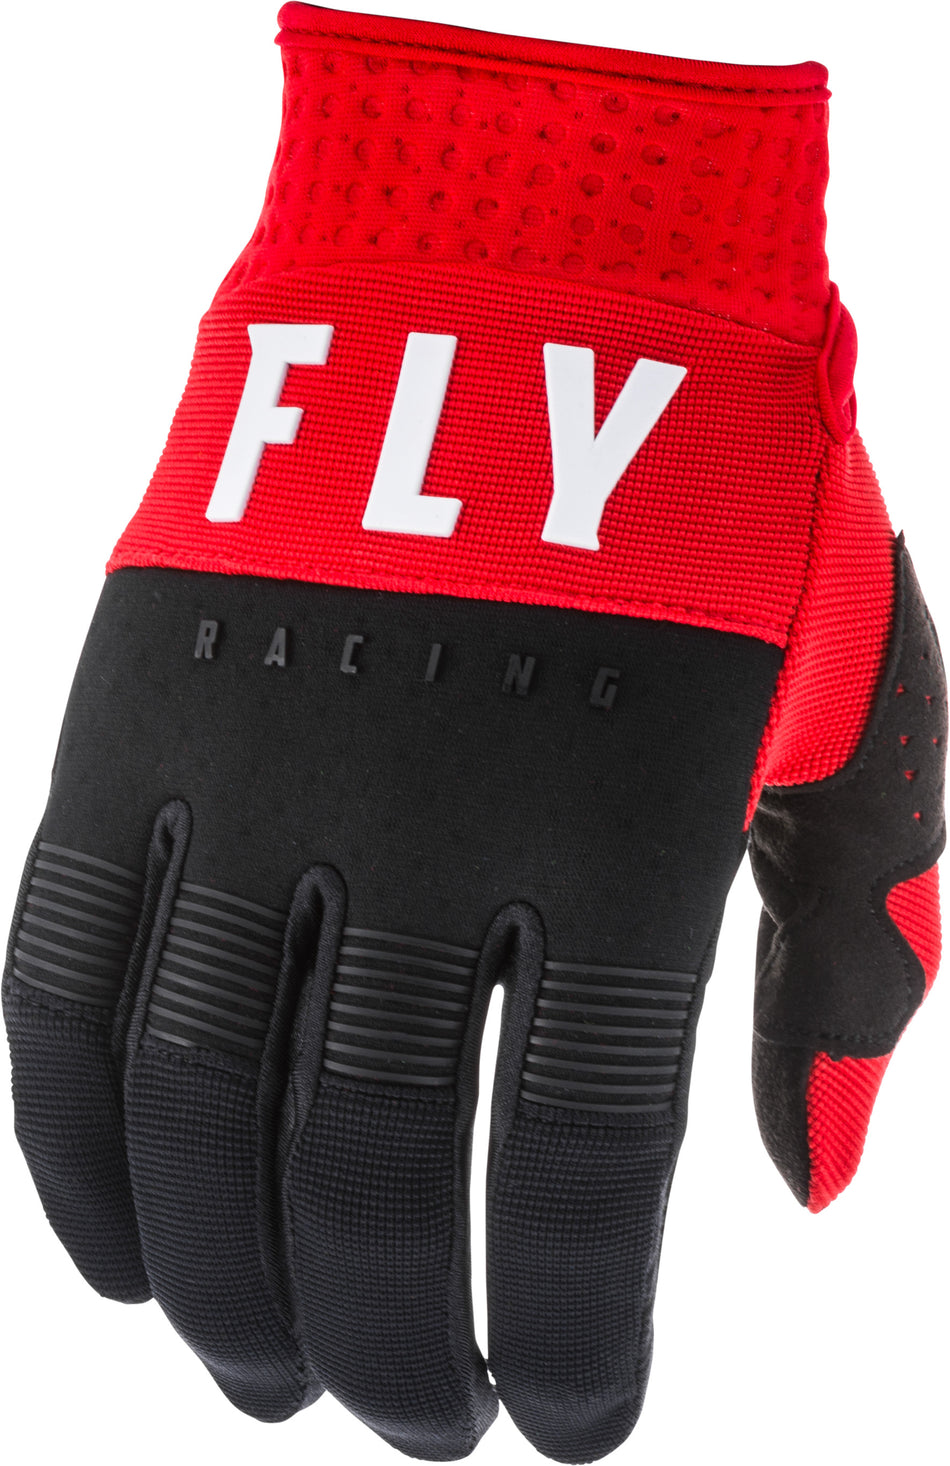 FLY RACING F-16 Gloves Red/Black/White Sz 01 373-91301